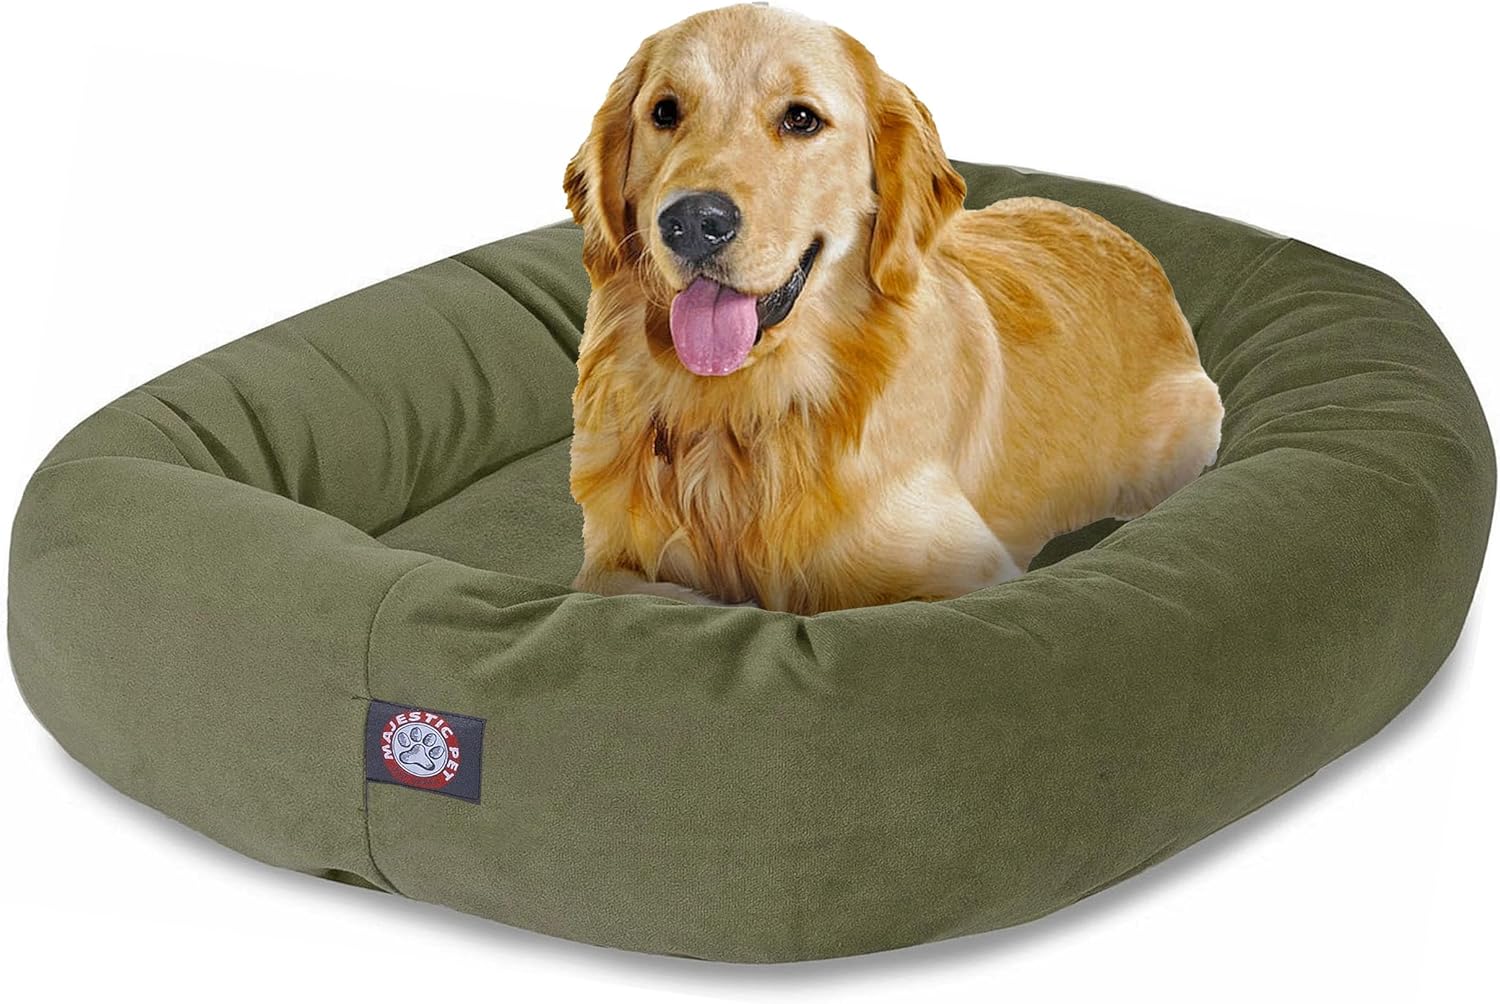 Majestic Pet 40 Inch Suede Calming Dog Bed Washable – Cozy Soft Round Dog Bed with Spine Support for Dogs to Rest their Head - Fluffy Donut Dog Bed 40x29x9 (Inch) - Round Pet Bed Large – Sage